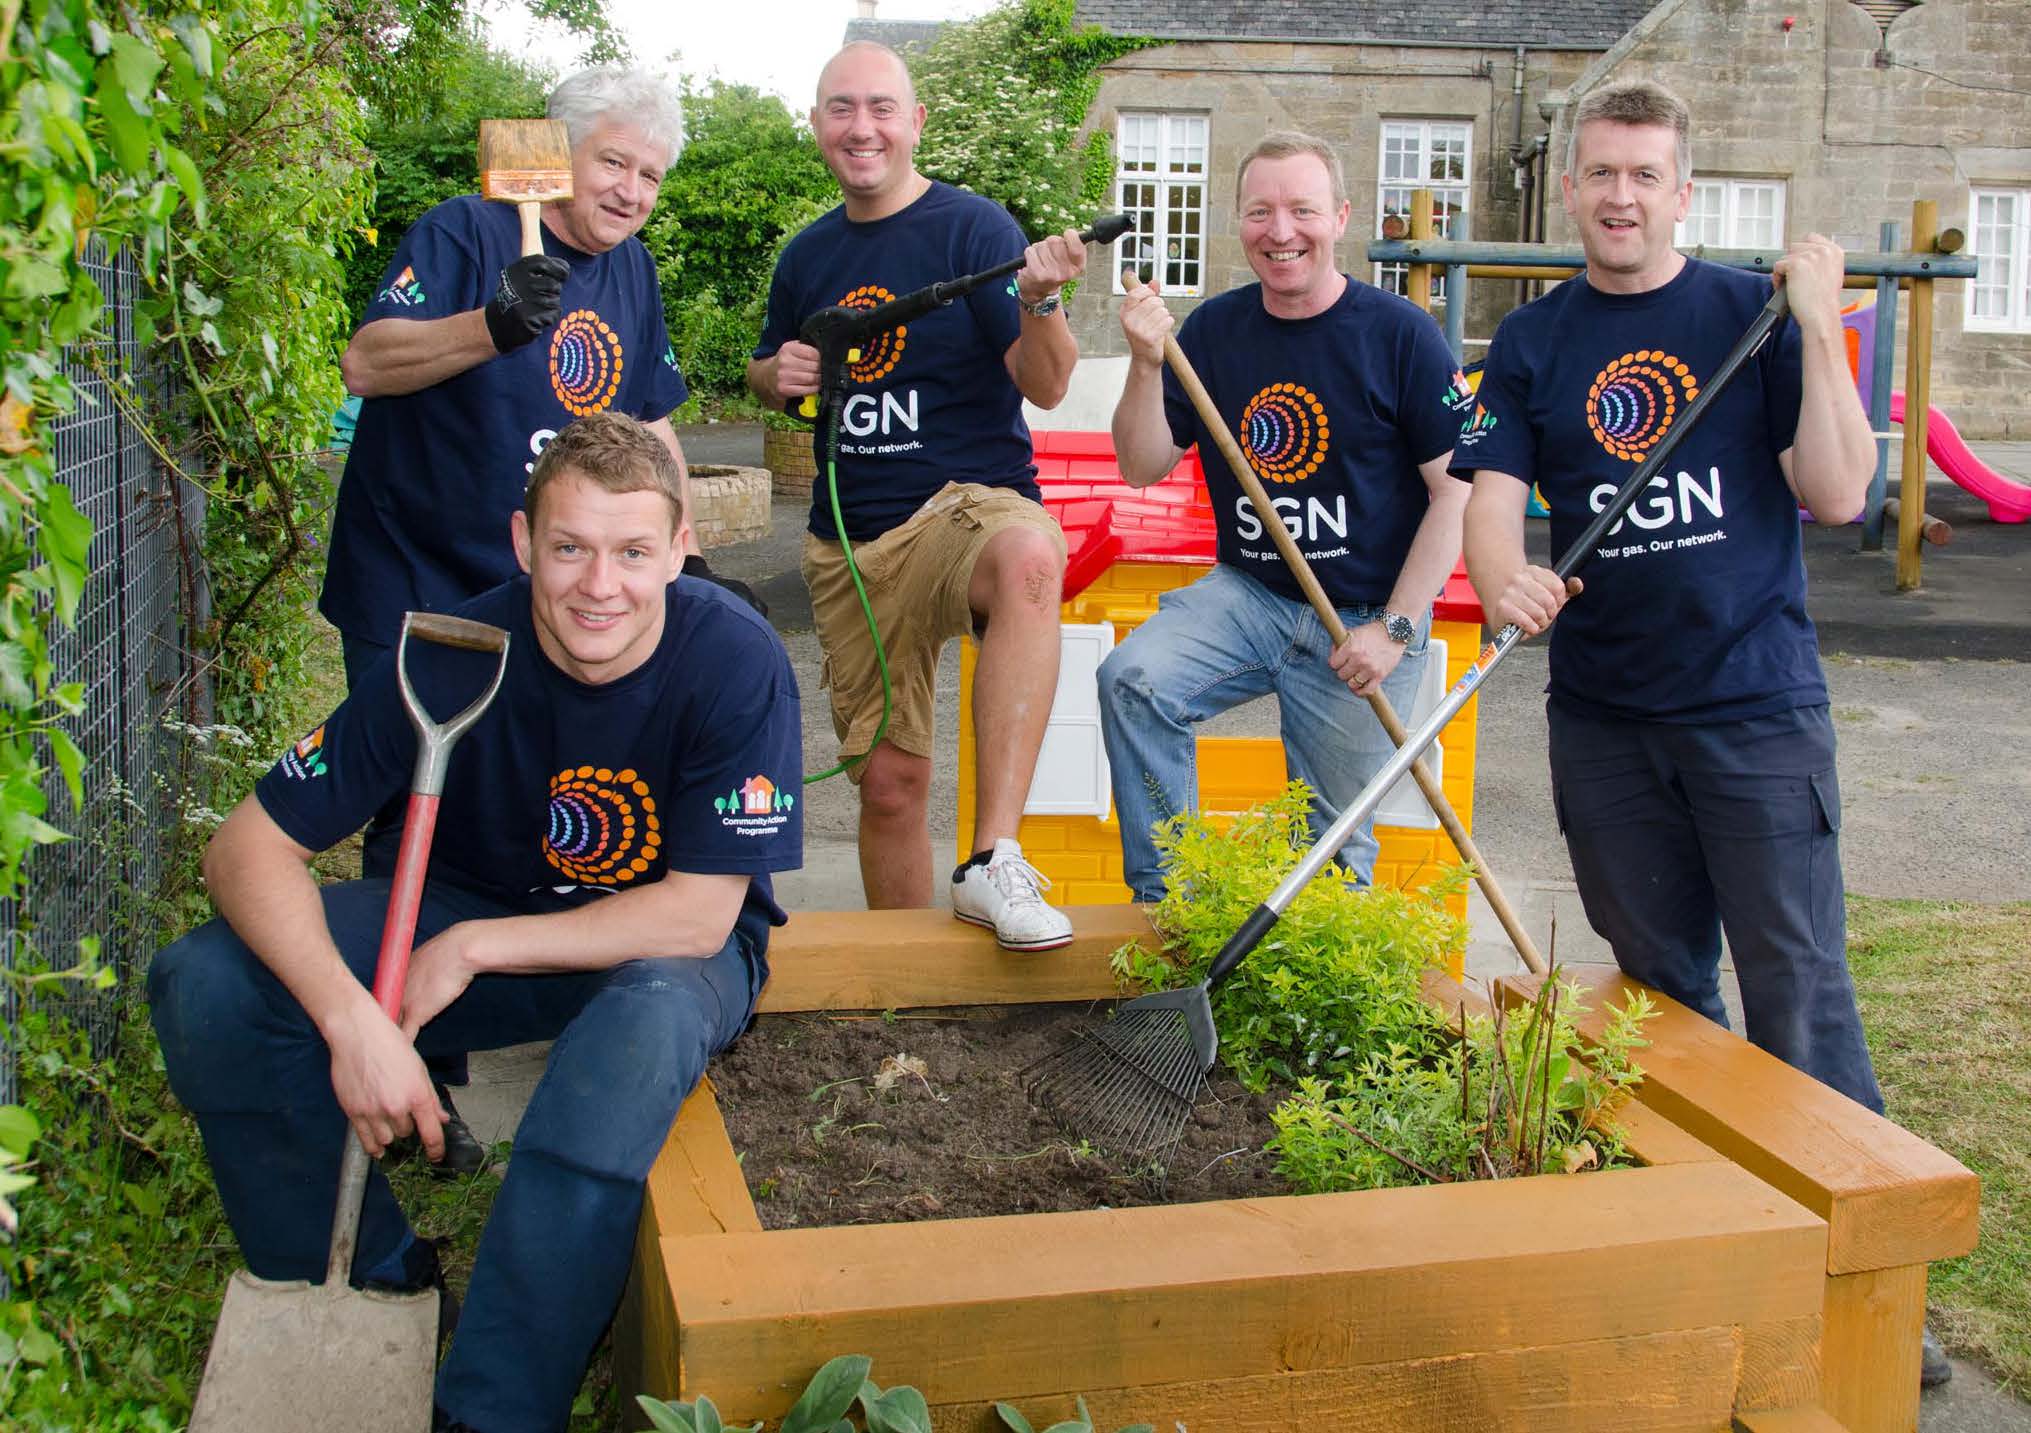 SGN employees working on a community gardening project